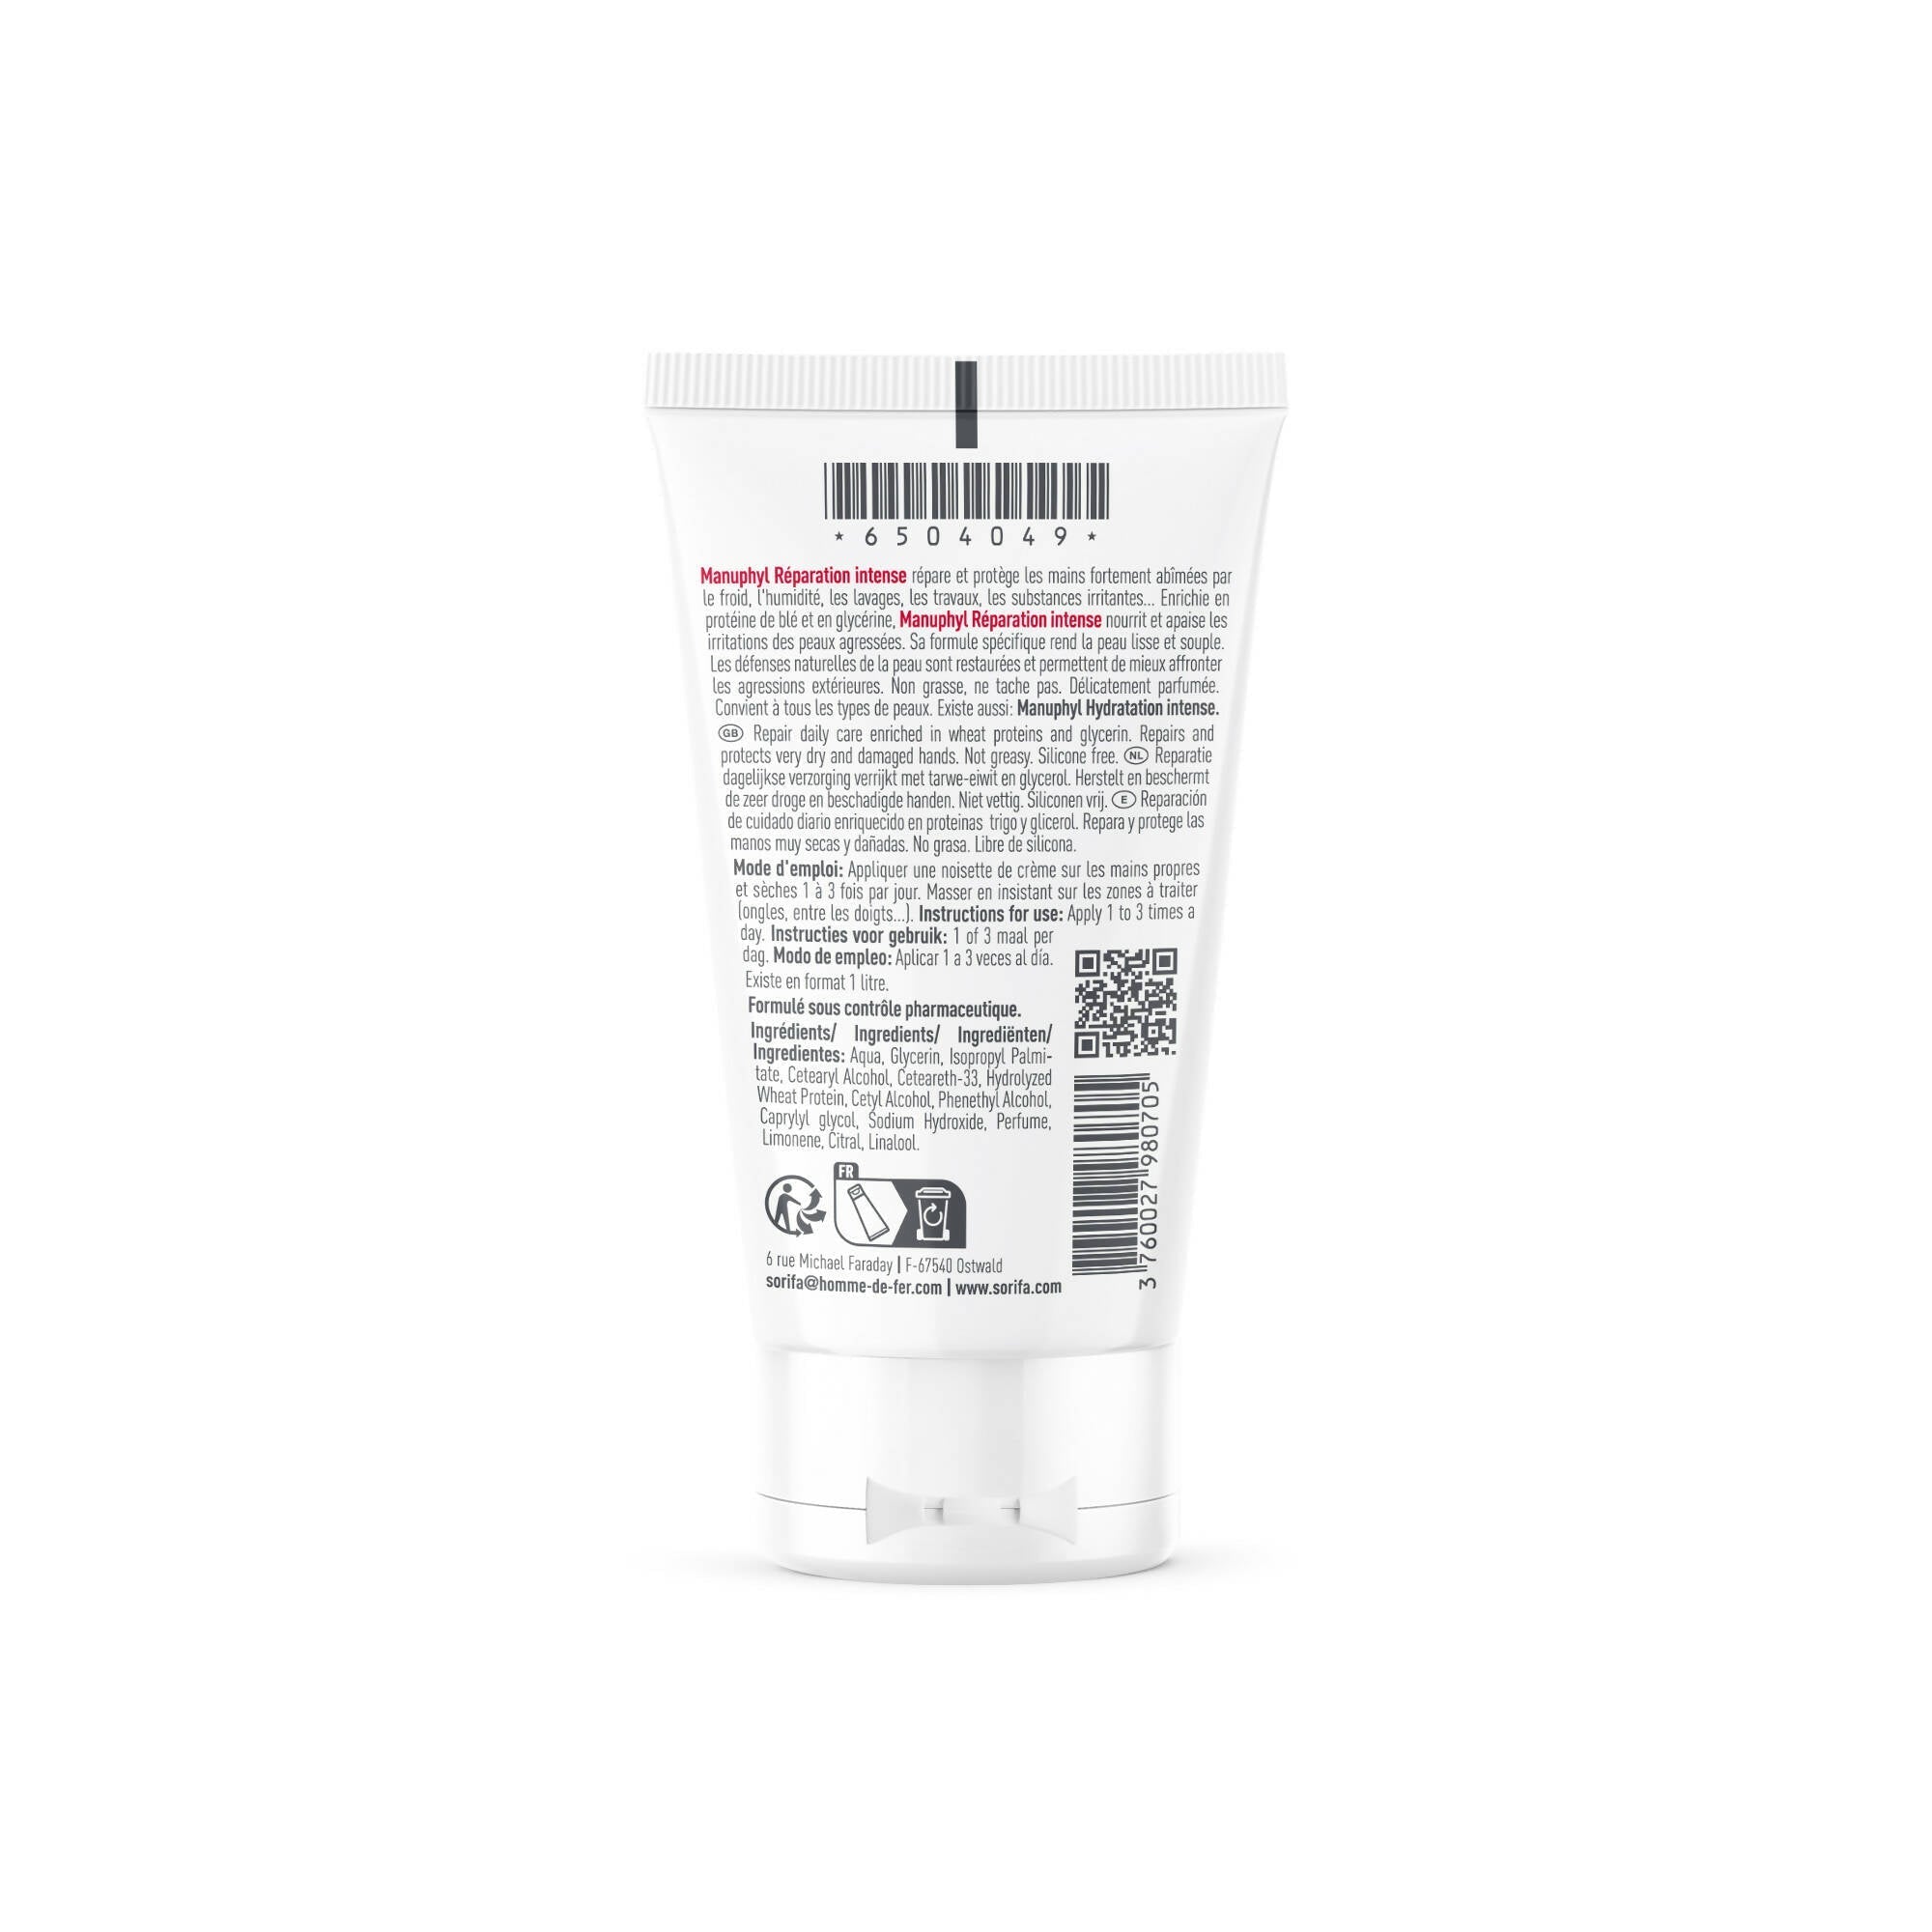 SORIFA - Pack of 12 Manuphyl Intense Repair Hand Cream / Keelis - Repairs and protects - Very dry and damaged hands - Little oily, lightly scented, enriched with glycerin and wheat proteins - Tube 50 ml - 0